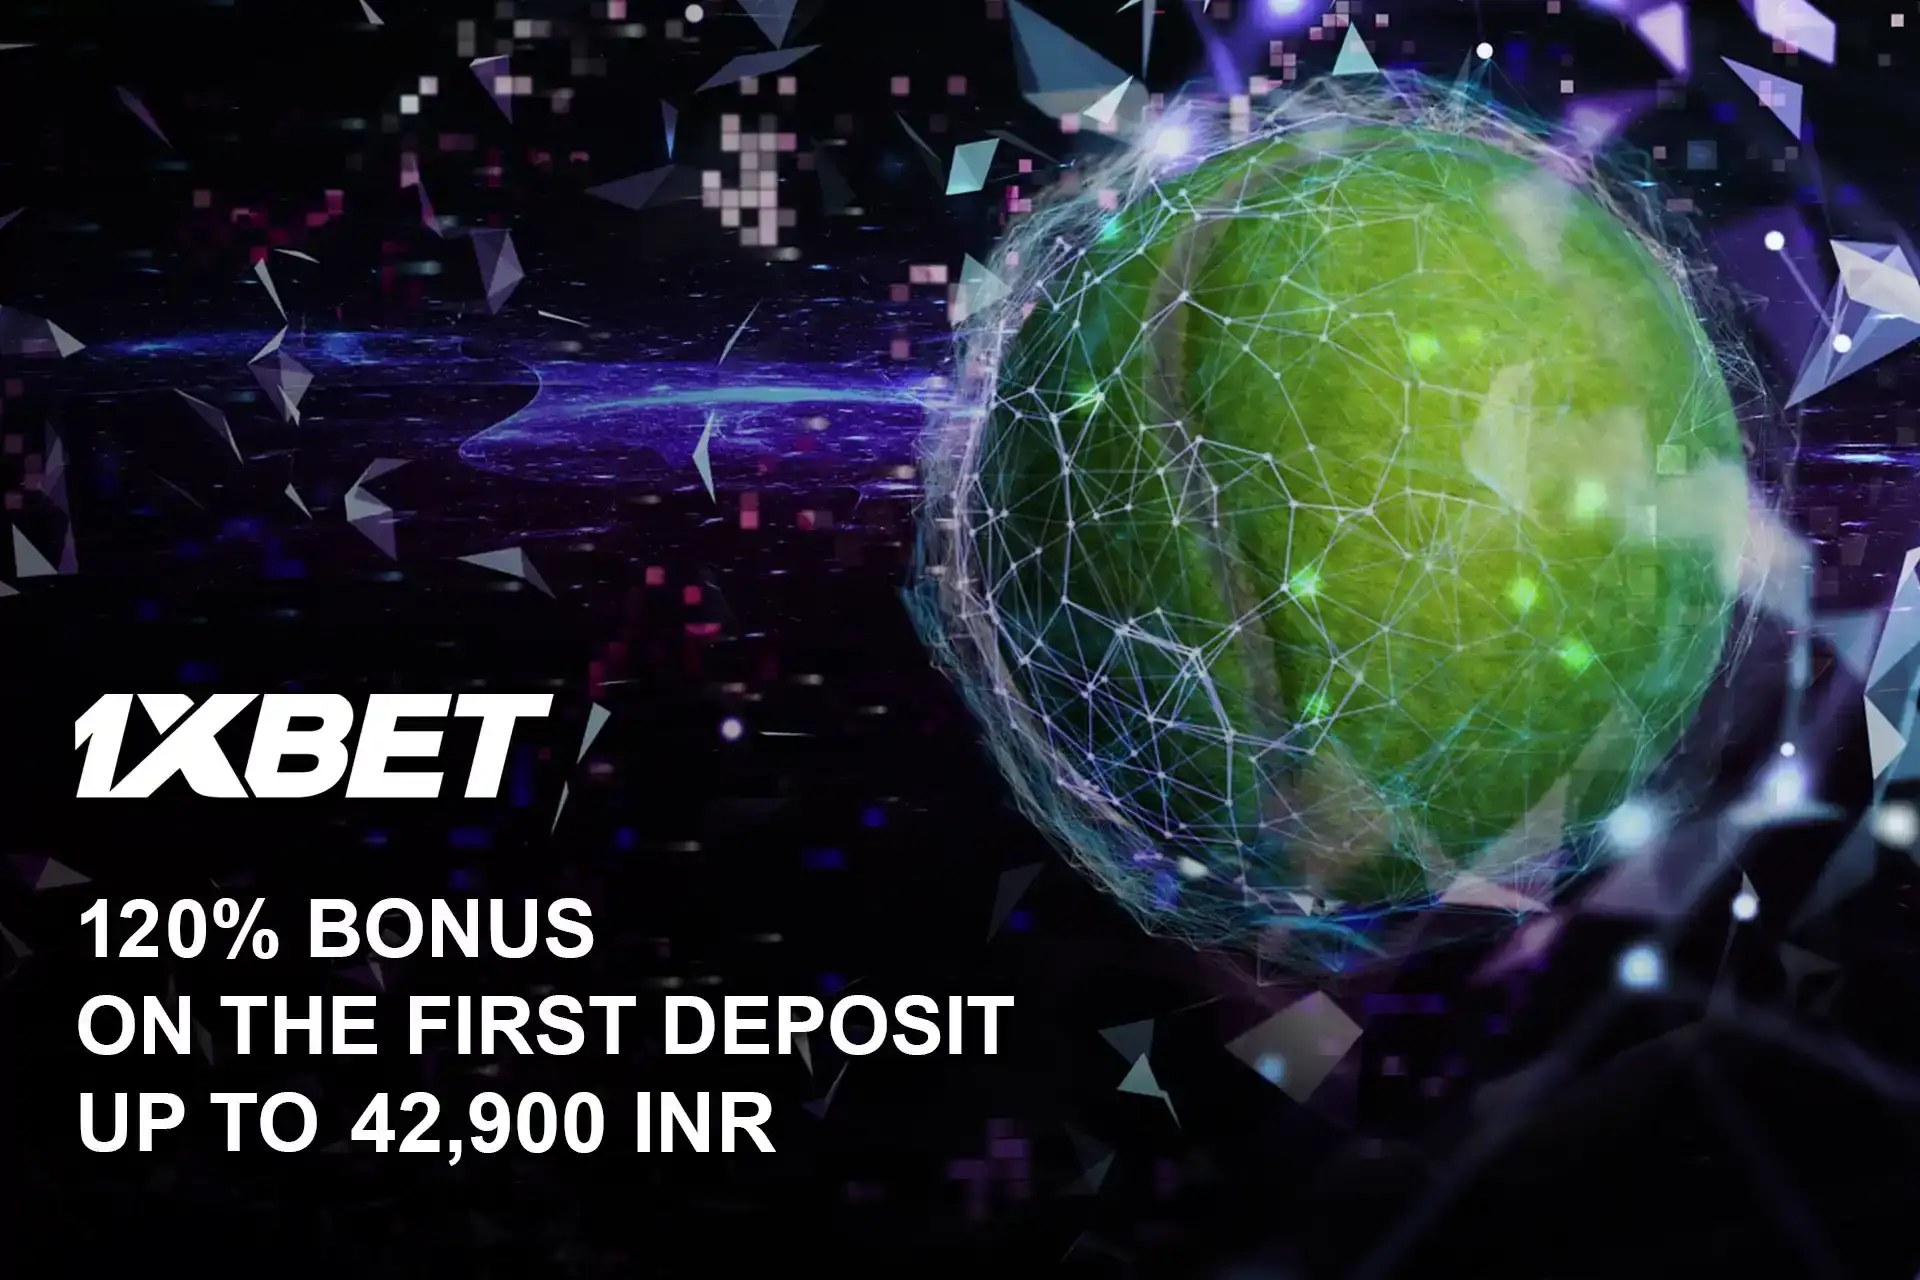 For new users, there is a welcome offer of a bonus on the first deposit at 1xBet.